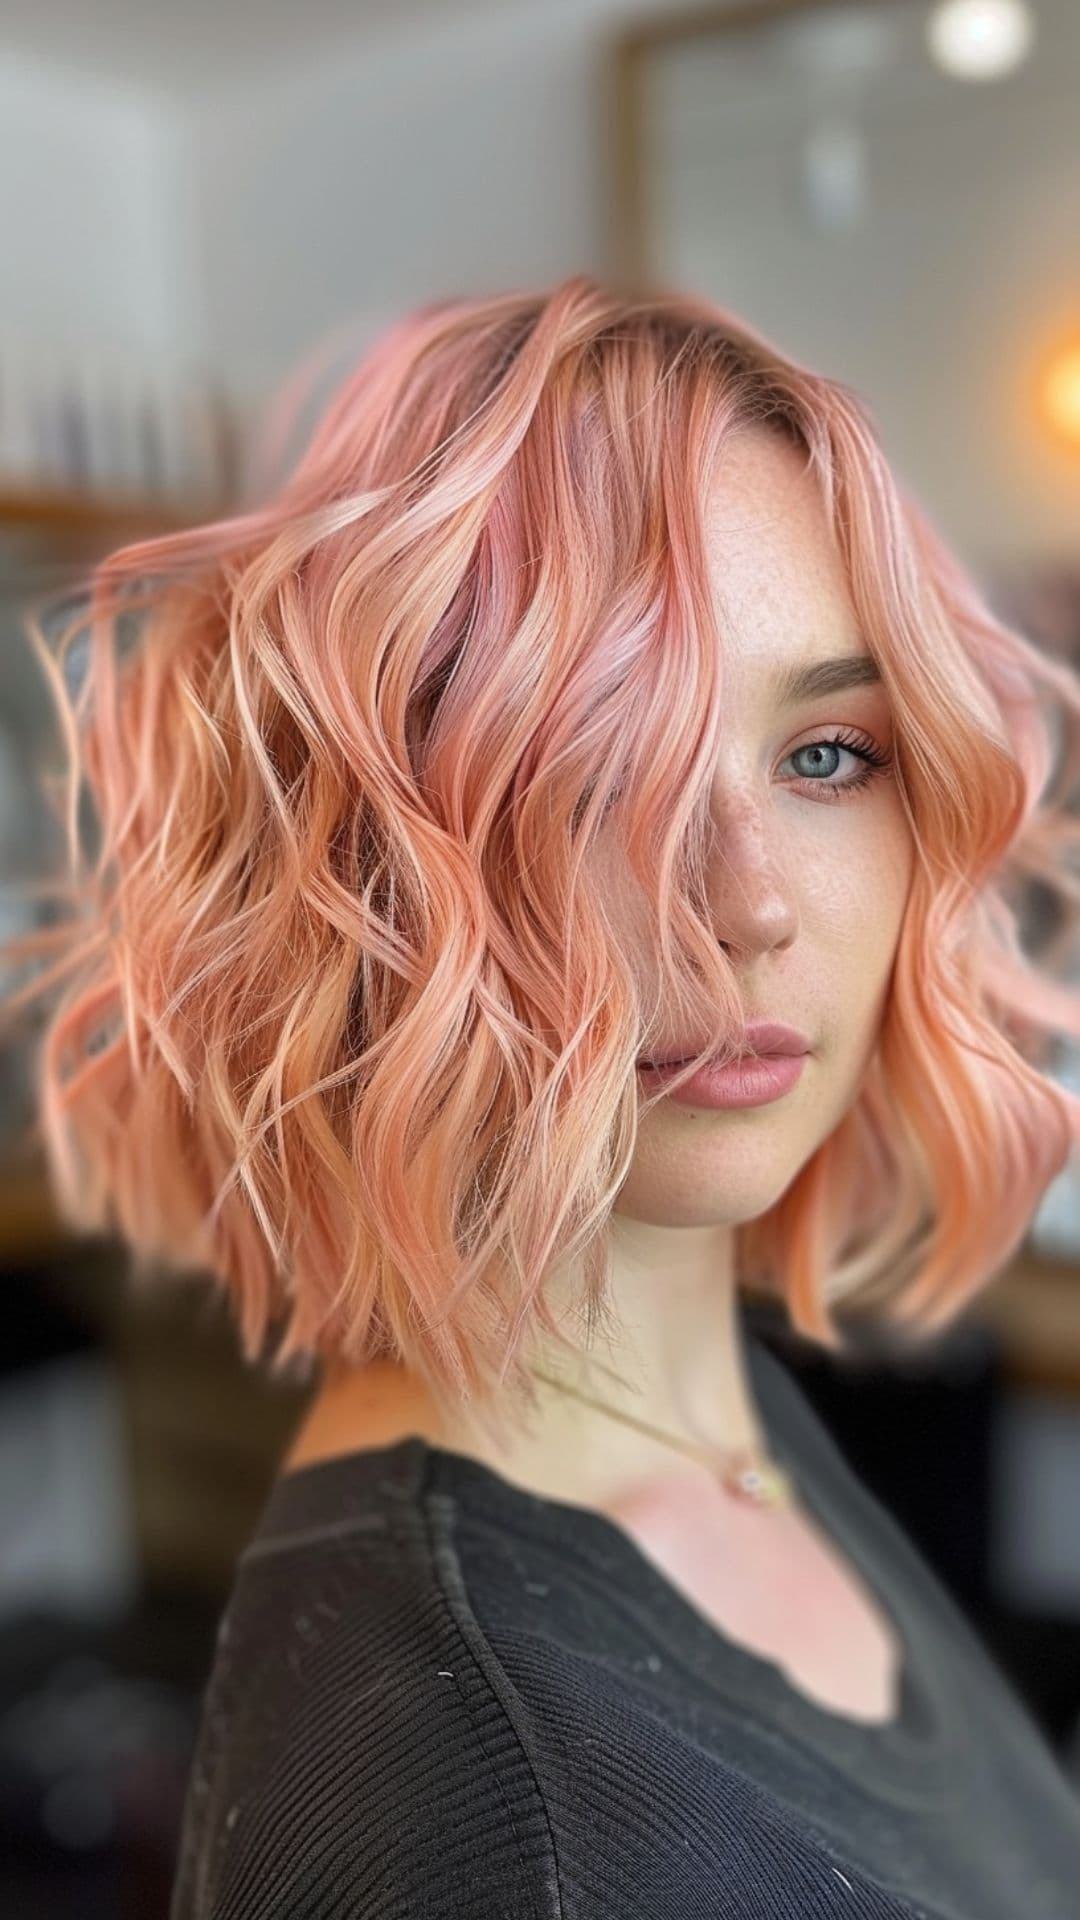 A woman modelling a pink and peach hair.